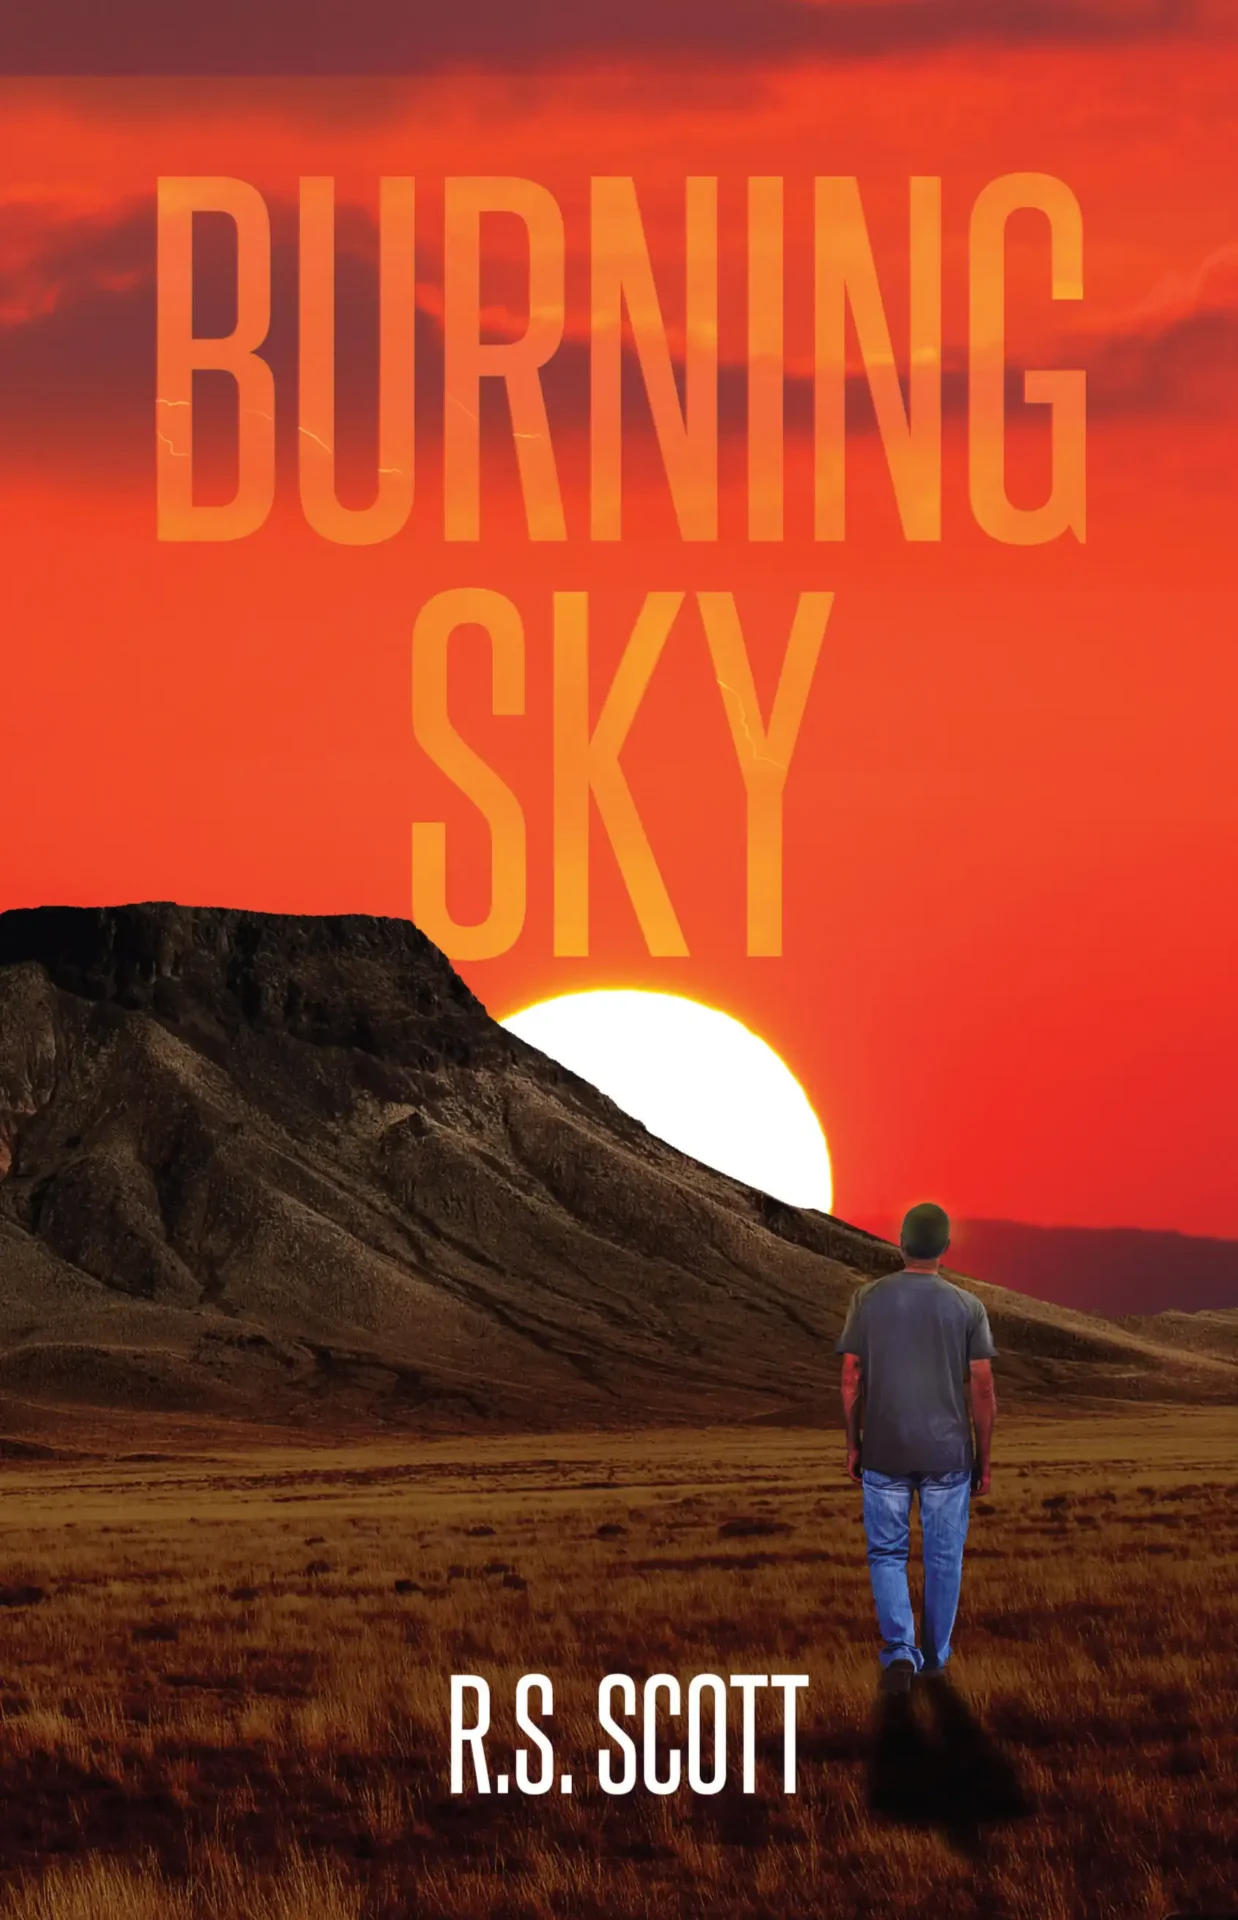 Burning Sky by R.S. Scott book cover